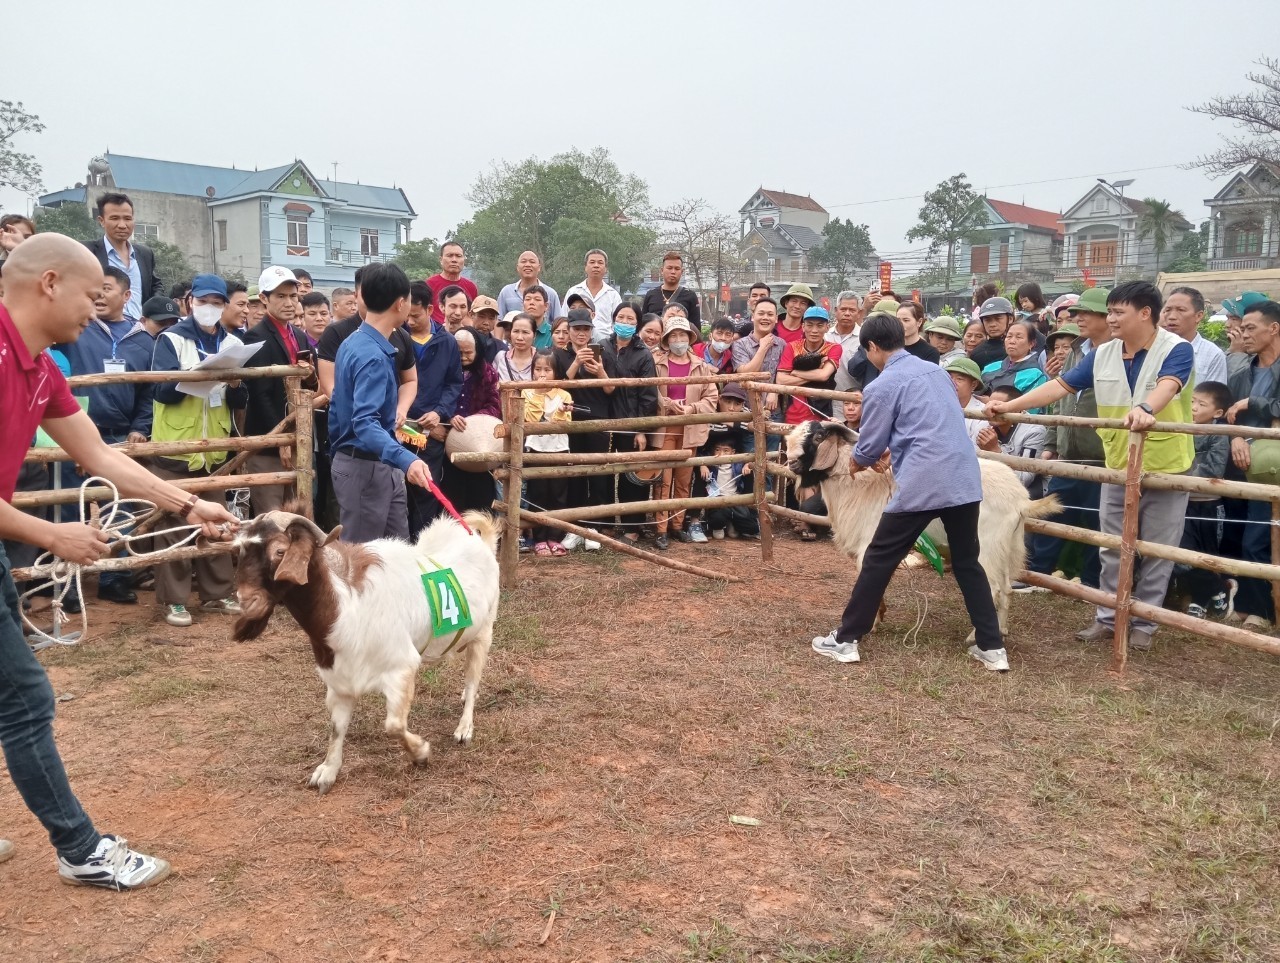 Goat Festival - A Unique Cultural Feature of Spring by the GNI in Tuyen Quang Province